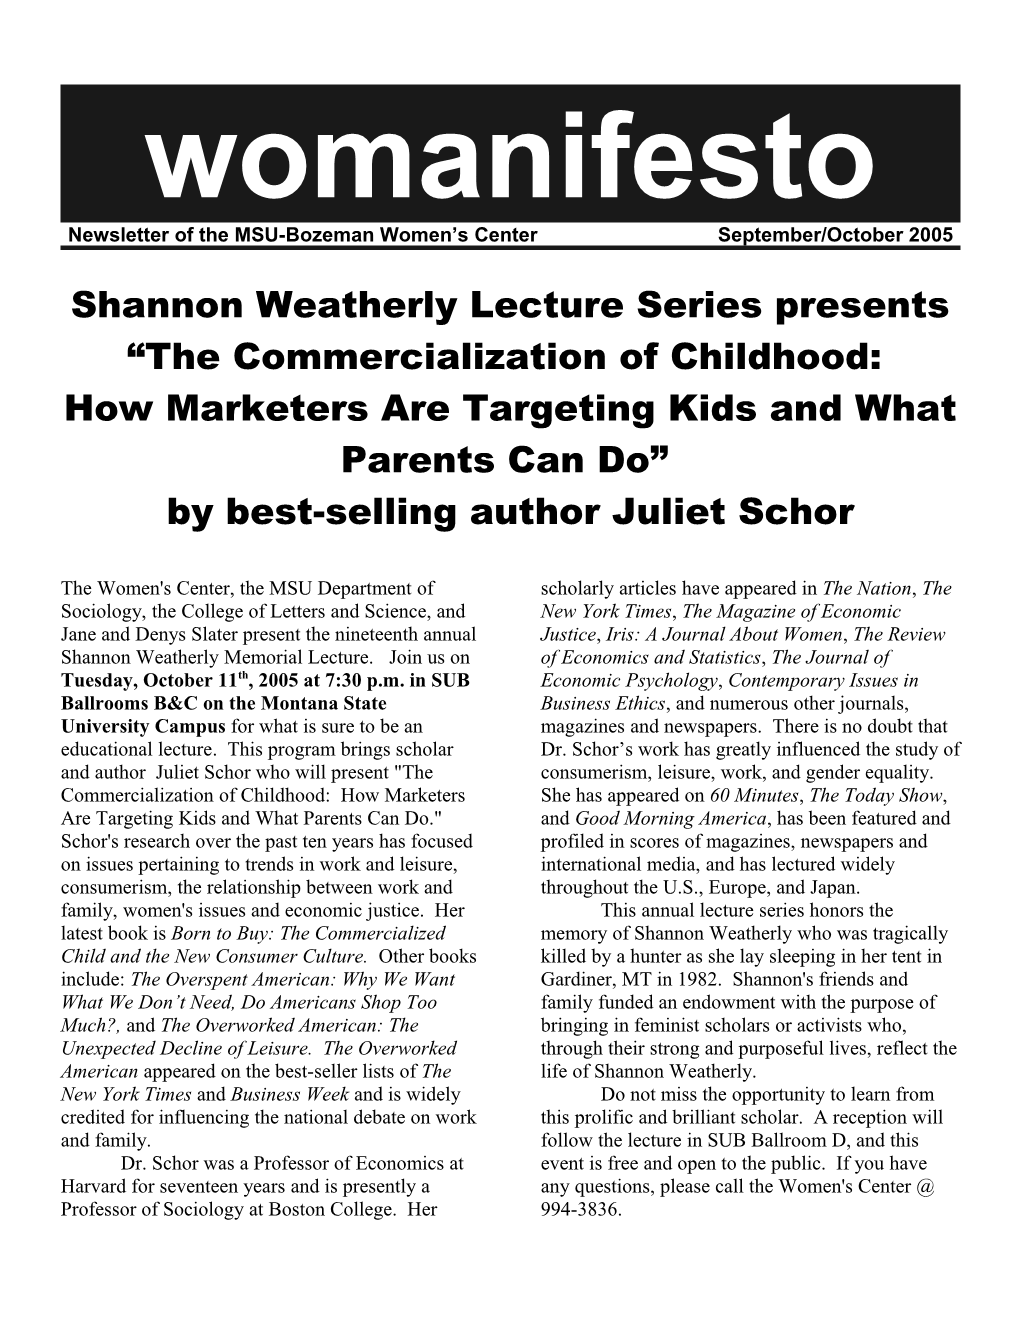 Shannon Weatherly Lecture Series Presents the Commercialization of Childhood